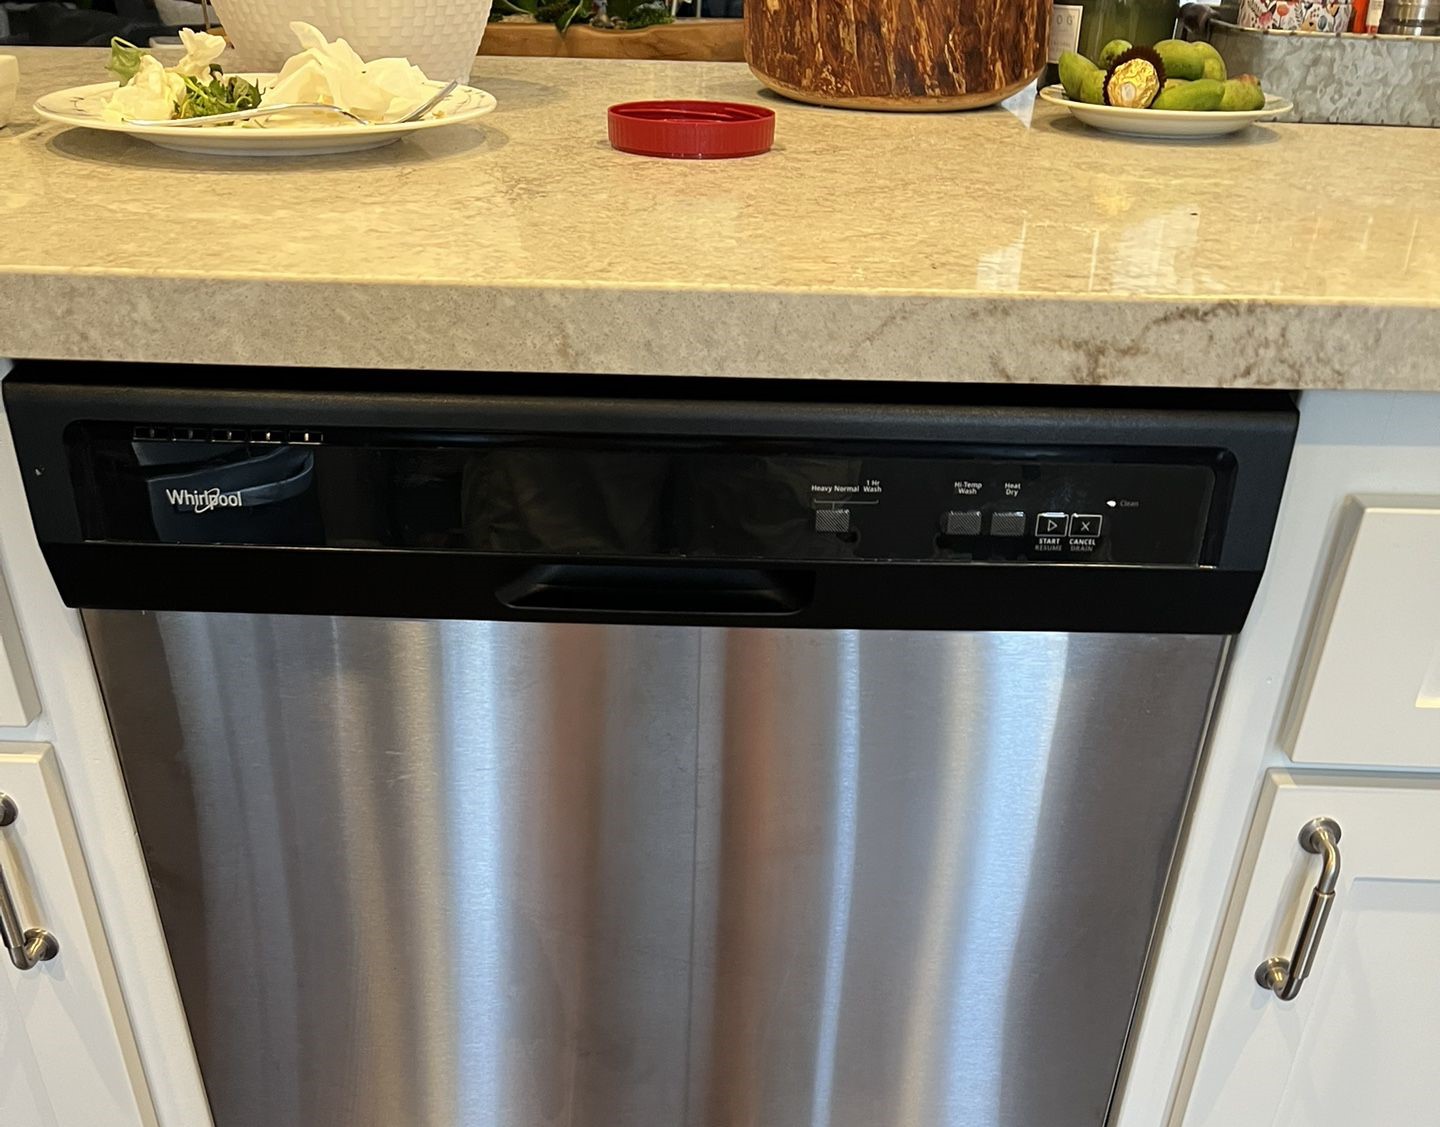 How To Fix The Error Code 45108 For Whirlpool Dishwasher